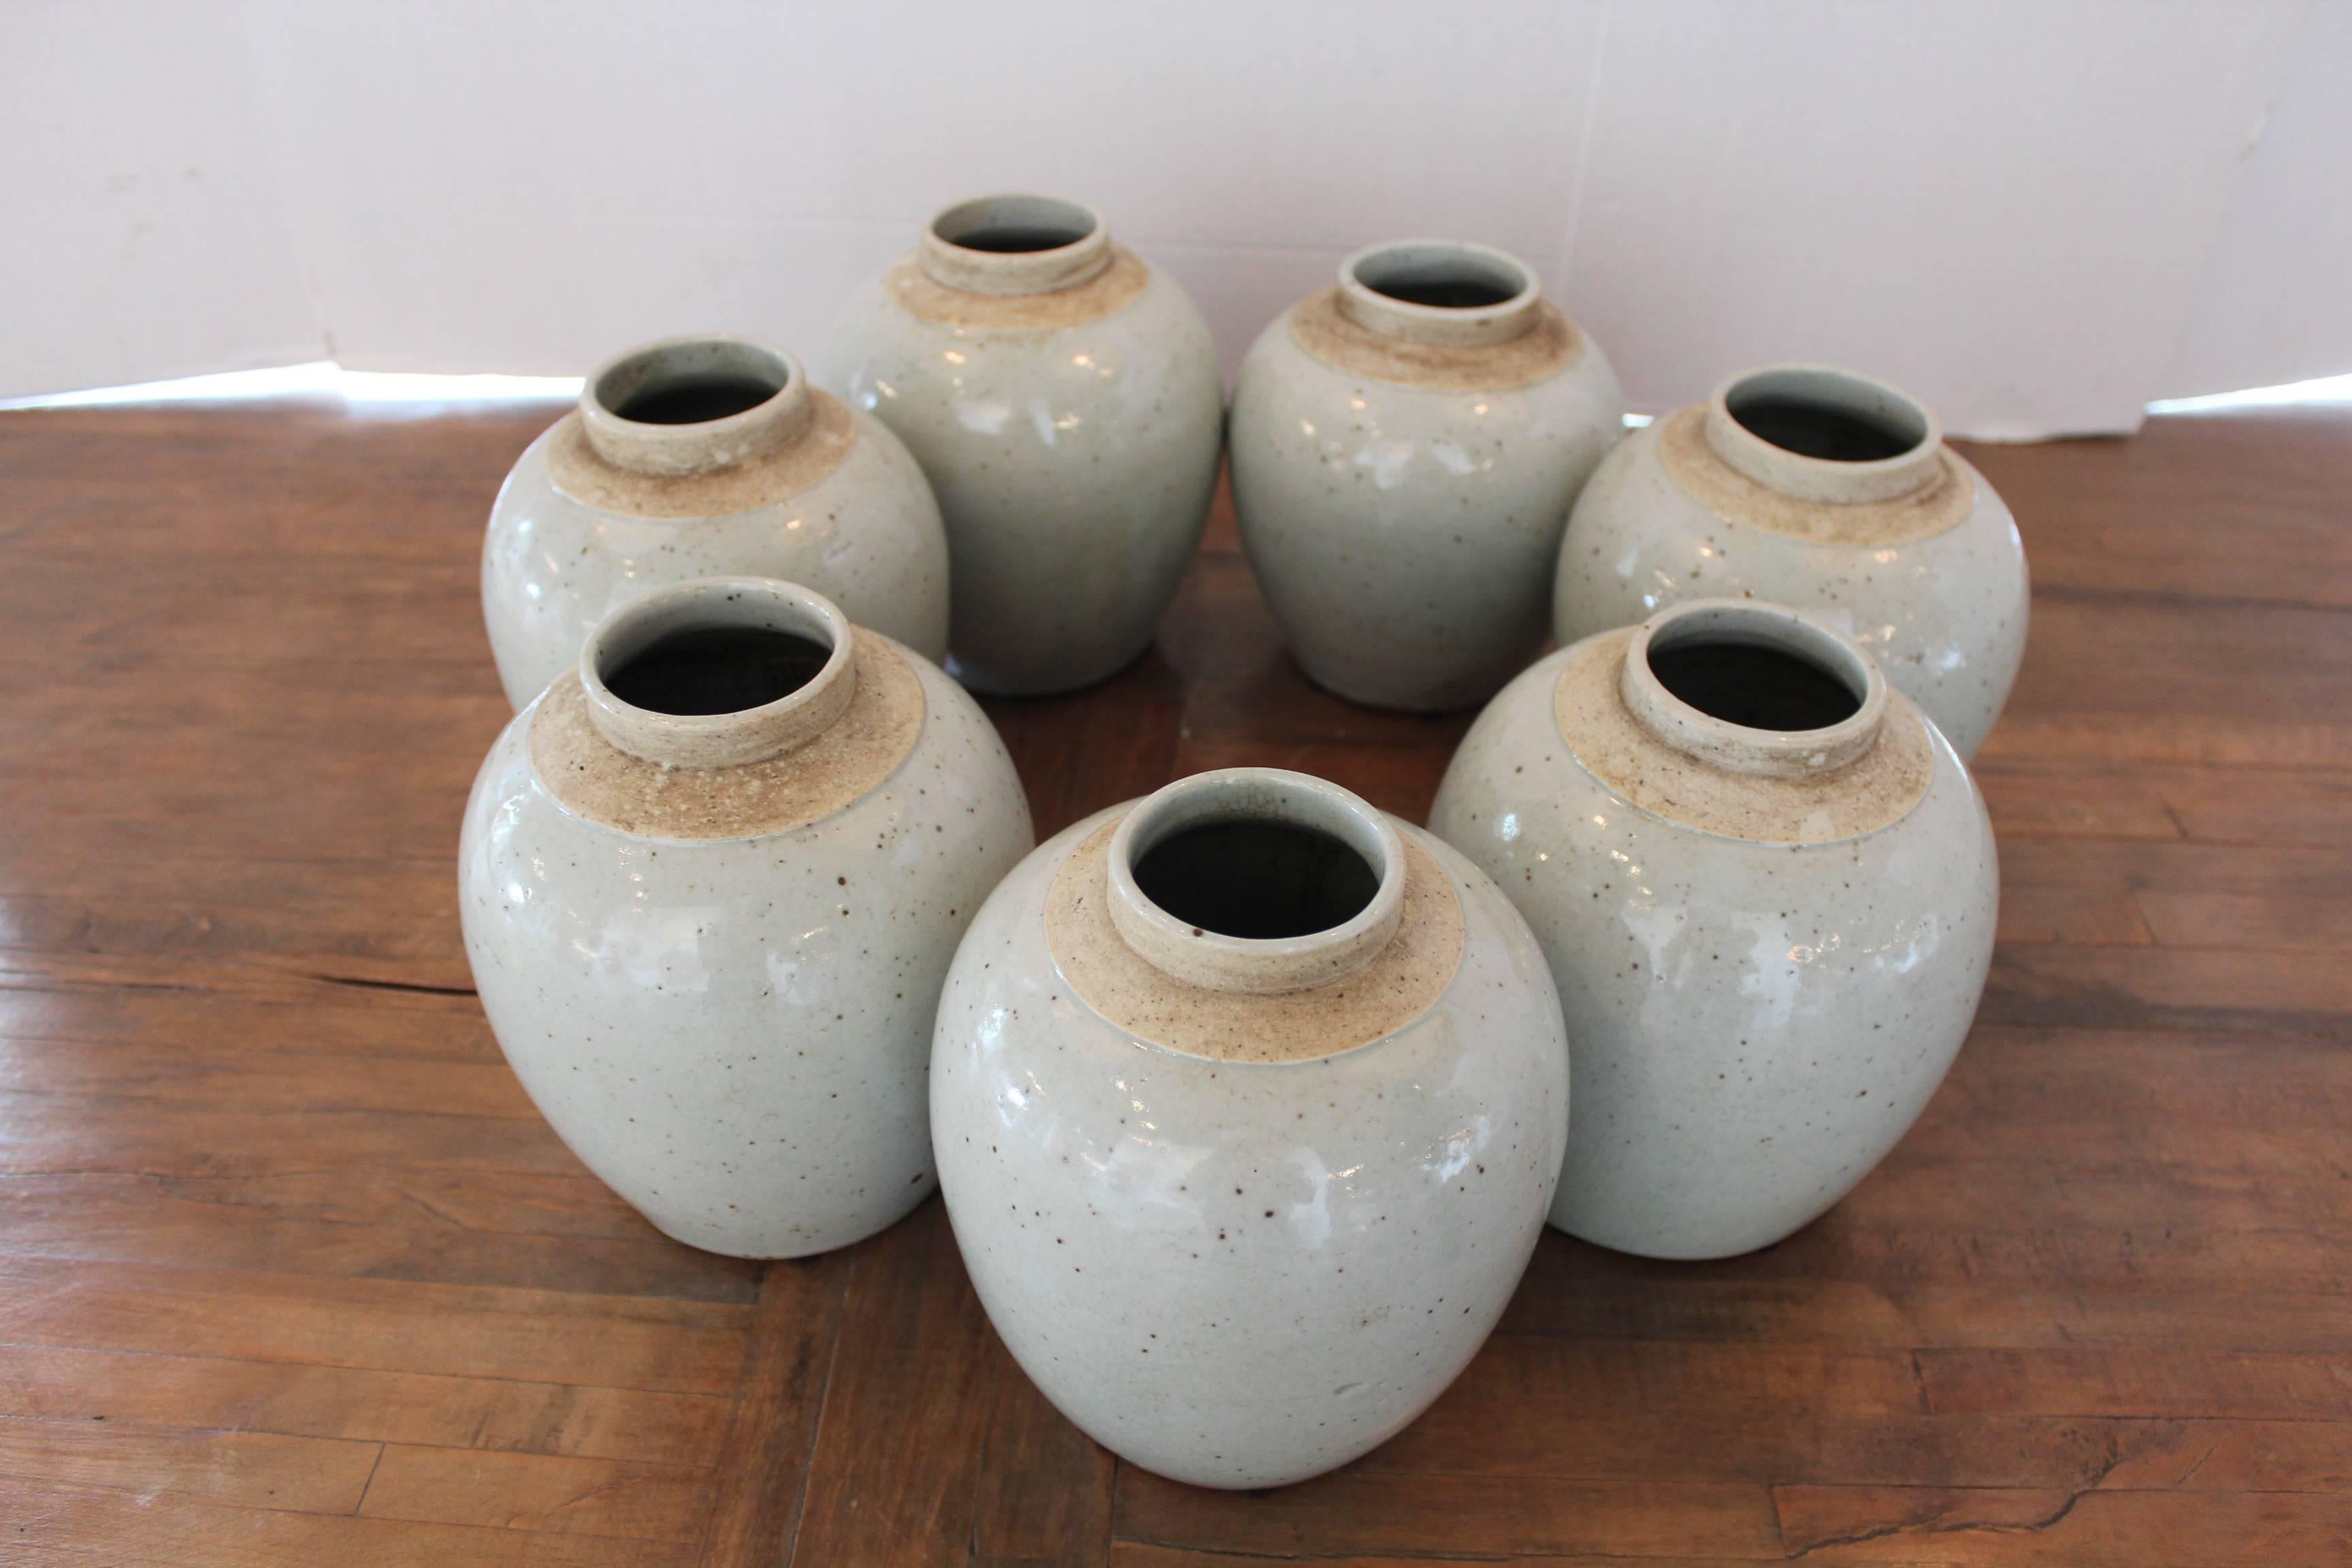 Antique small celadon terra cotta glazed jars. 

Speckled and crackled terra cotta glazed jar of light-grey celadon coloration with unglazed terra cotta at the top of the jar.  

